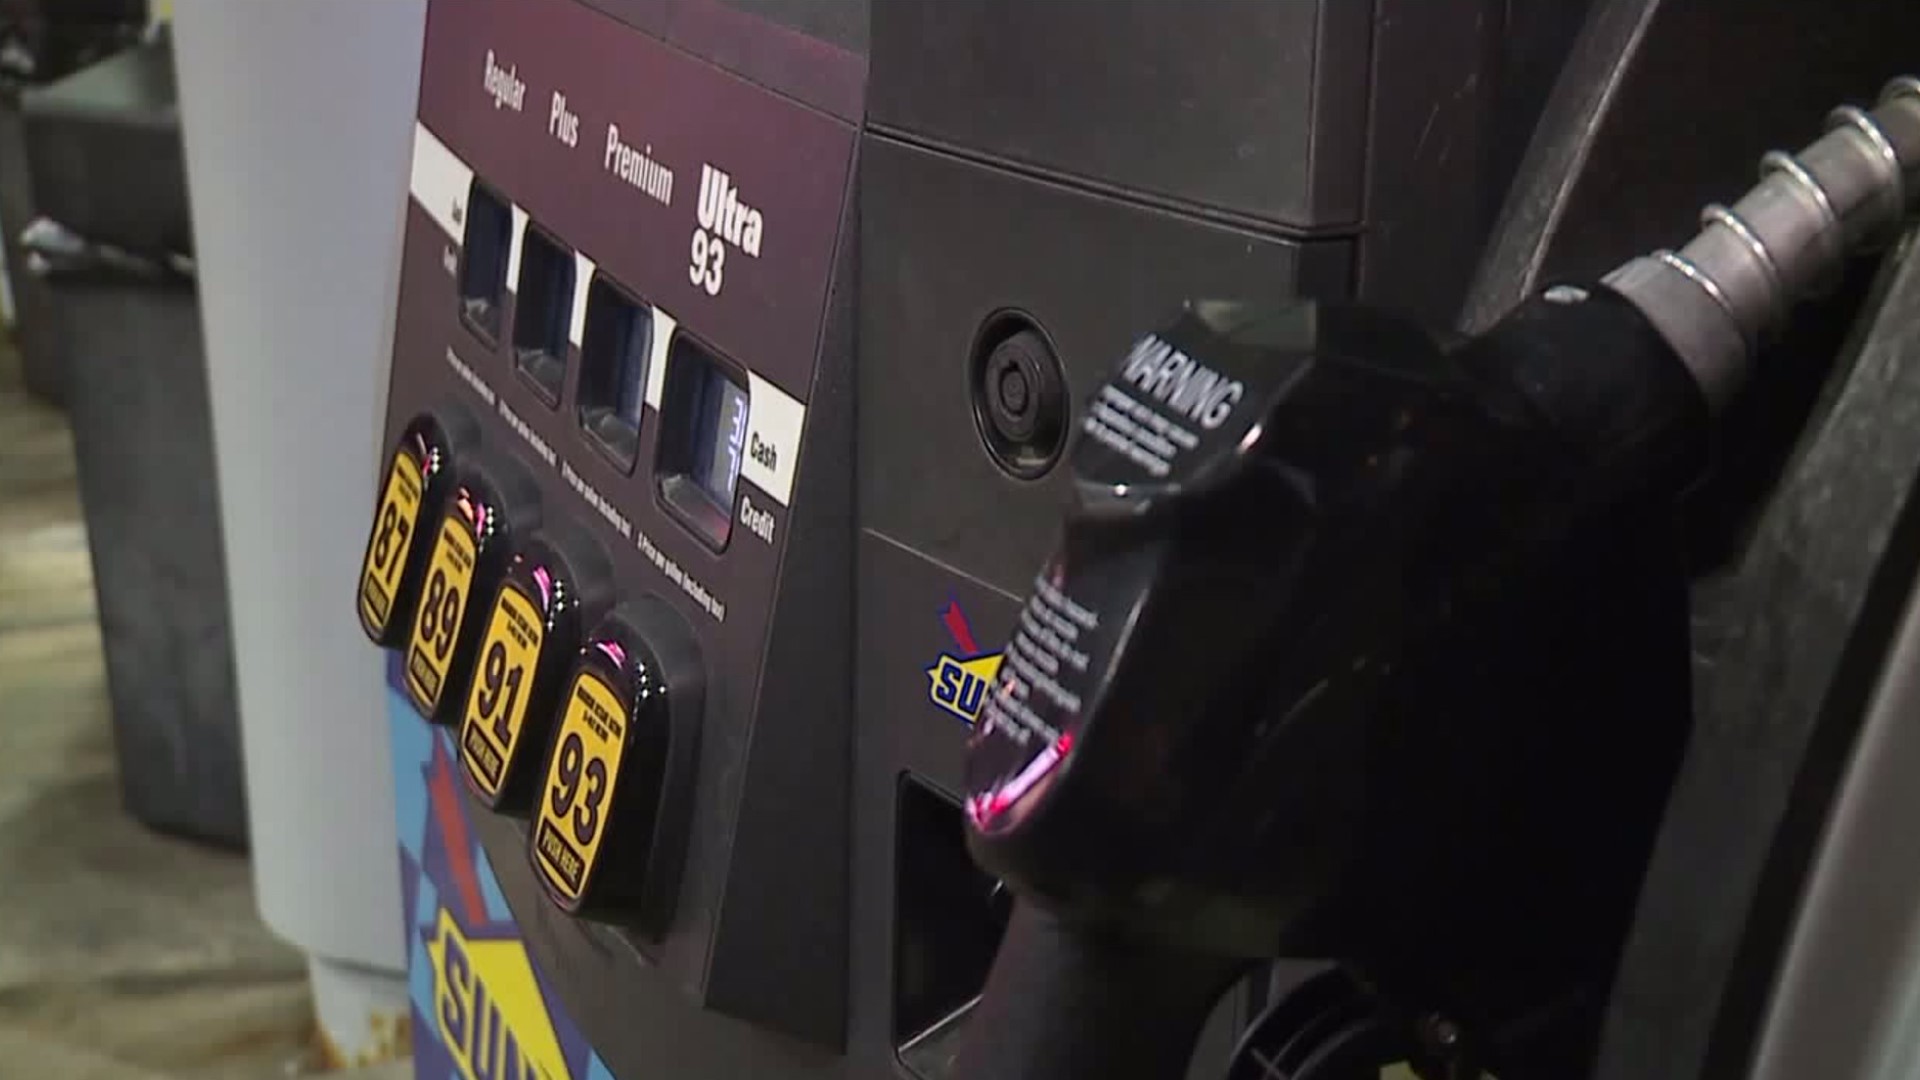 Gas prices are near all-time highs, but the Pennsylvania Attorney General can't currently investigate price gouging for gas prices.